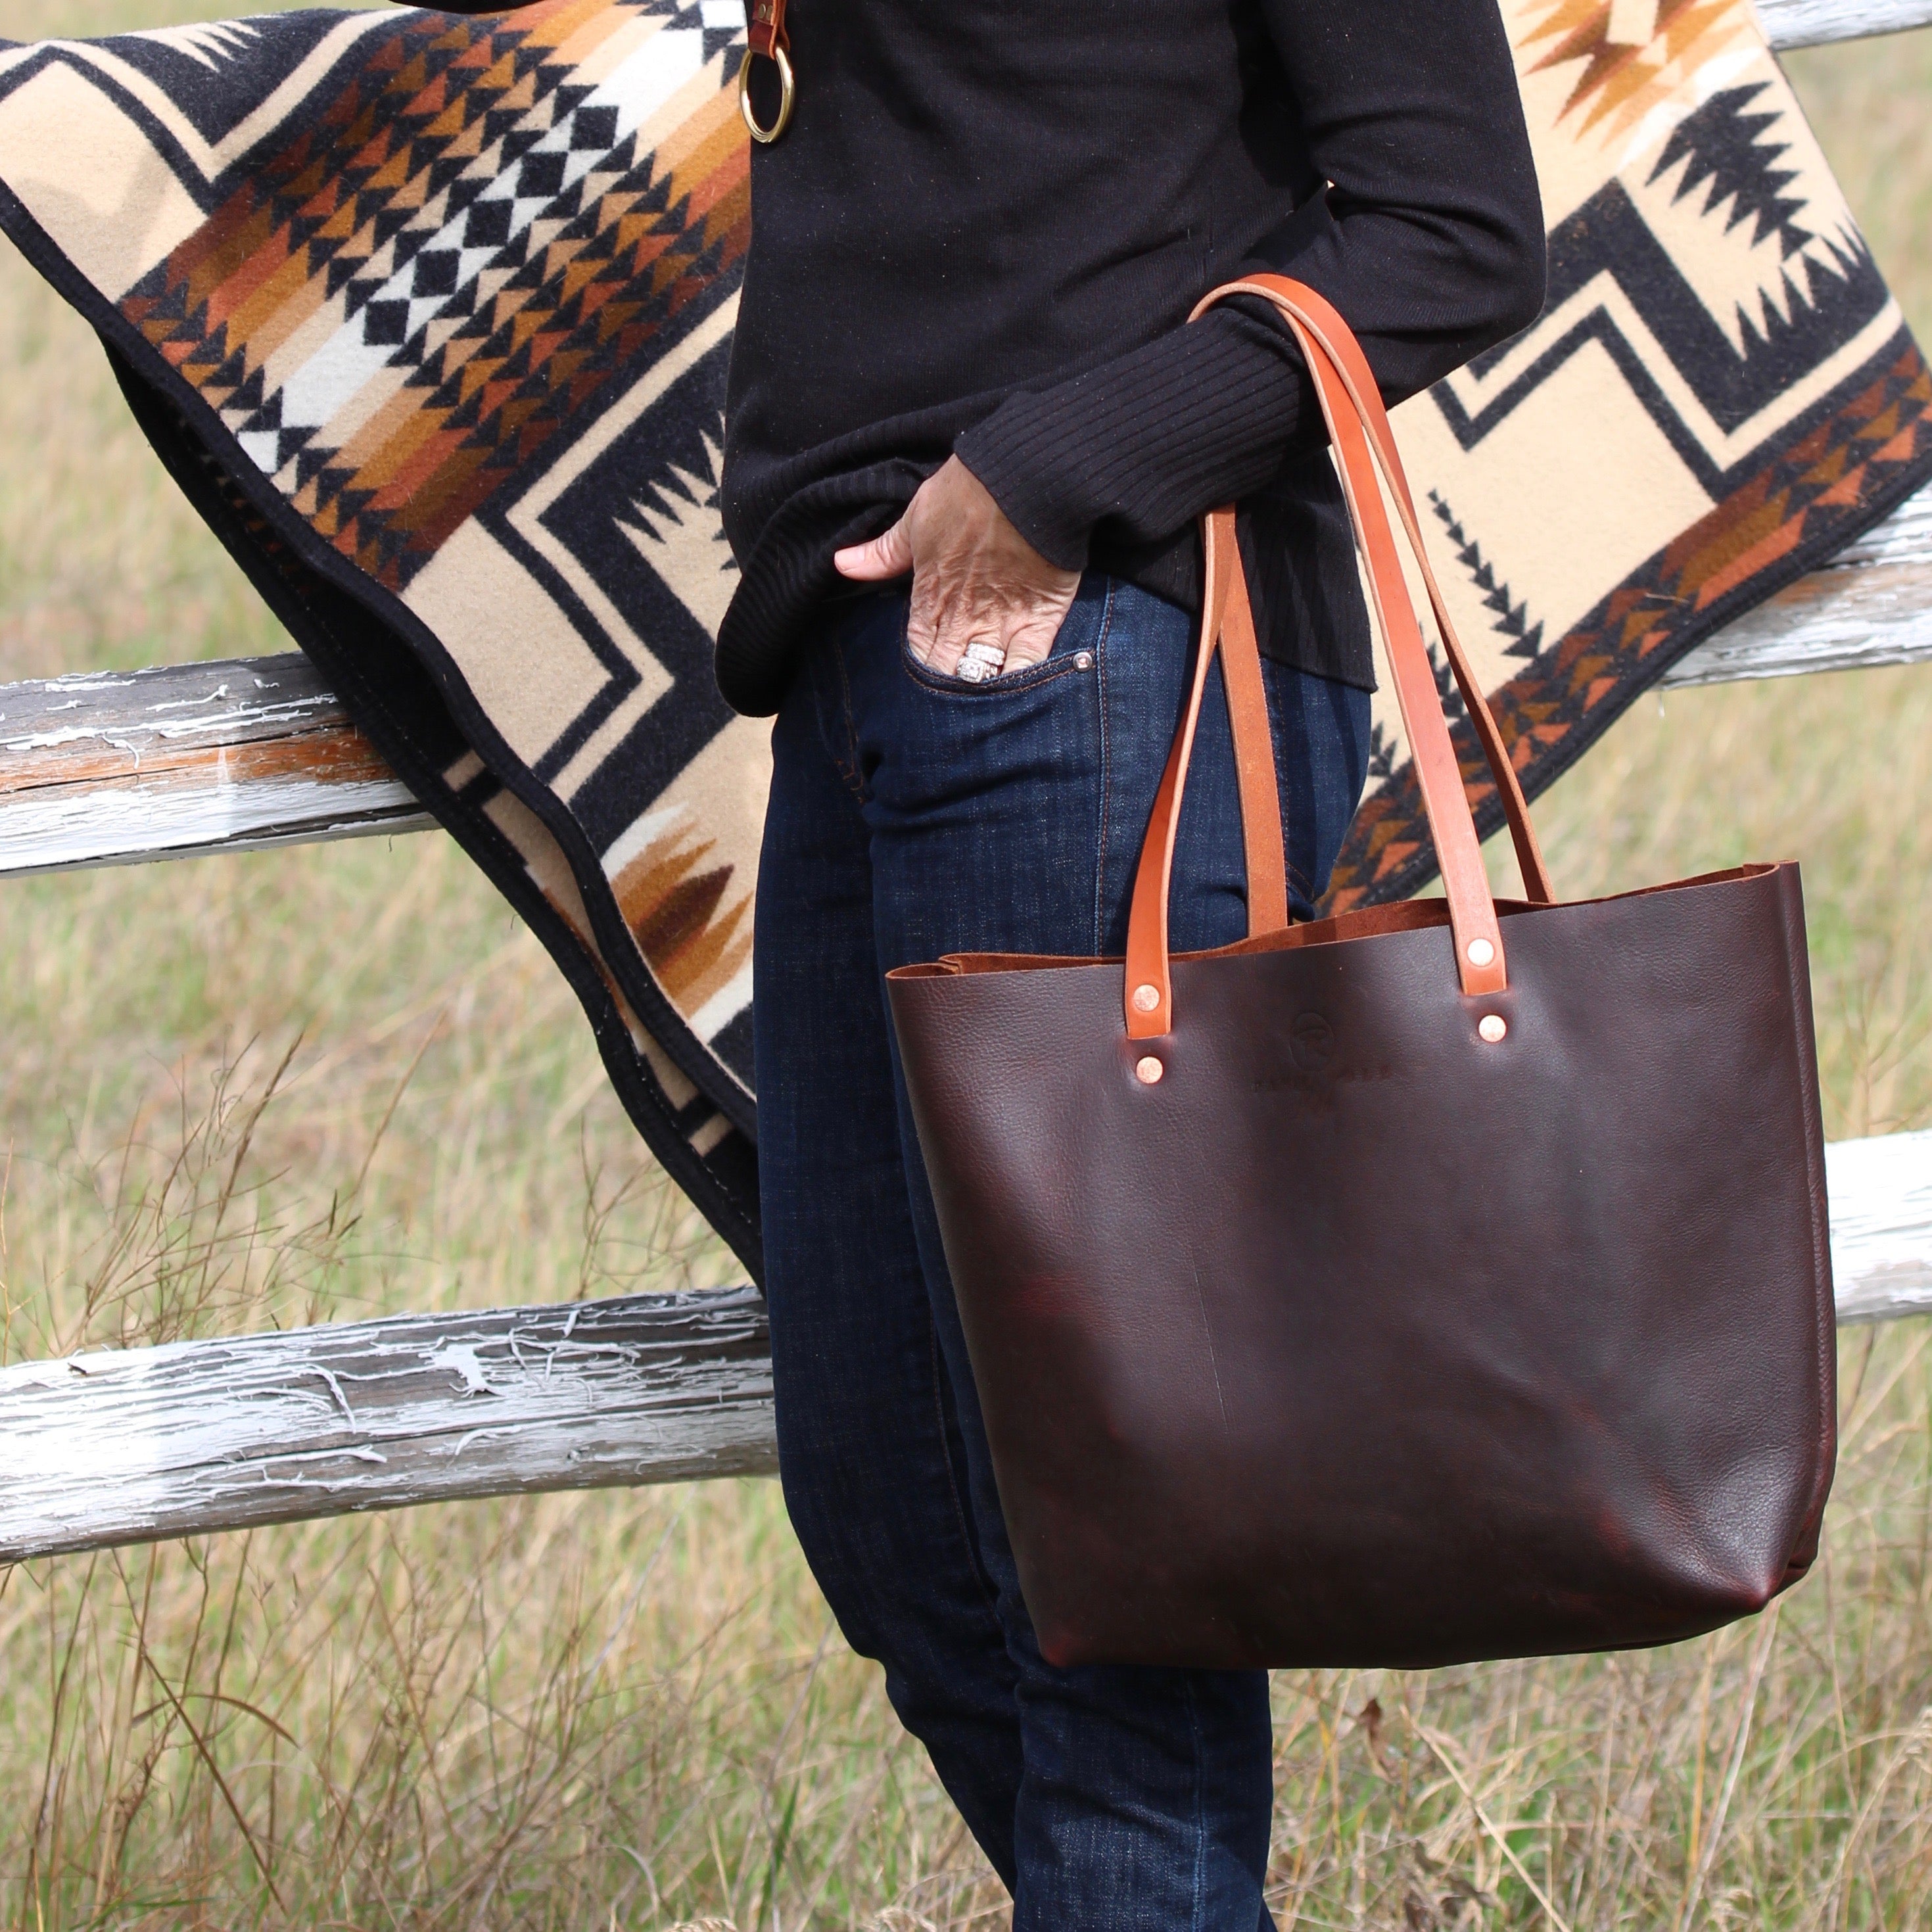 Brown Leather Bag, Brown Leather Tote Bag, Brown Leather Purse, Equestrian Purse, Equestrian Accessories, Purses, handbags, duffles, bags, crossbody purse, gift shop,Panhandle Red Company, Leather Goods, Handbags, Totes, Purses, artisan,  Full-grain leather items, custom gifts, handcrafted gift, idaho shops, leather shop